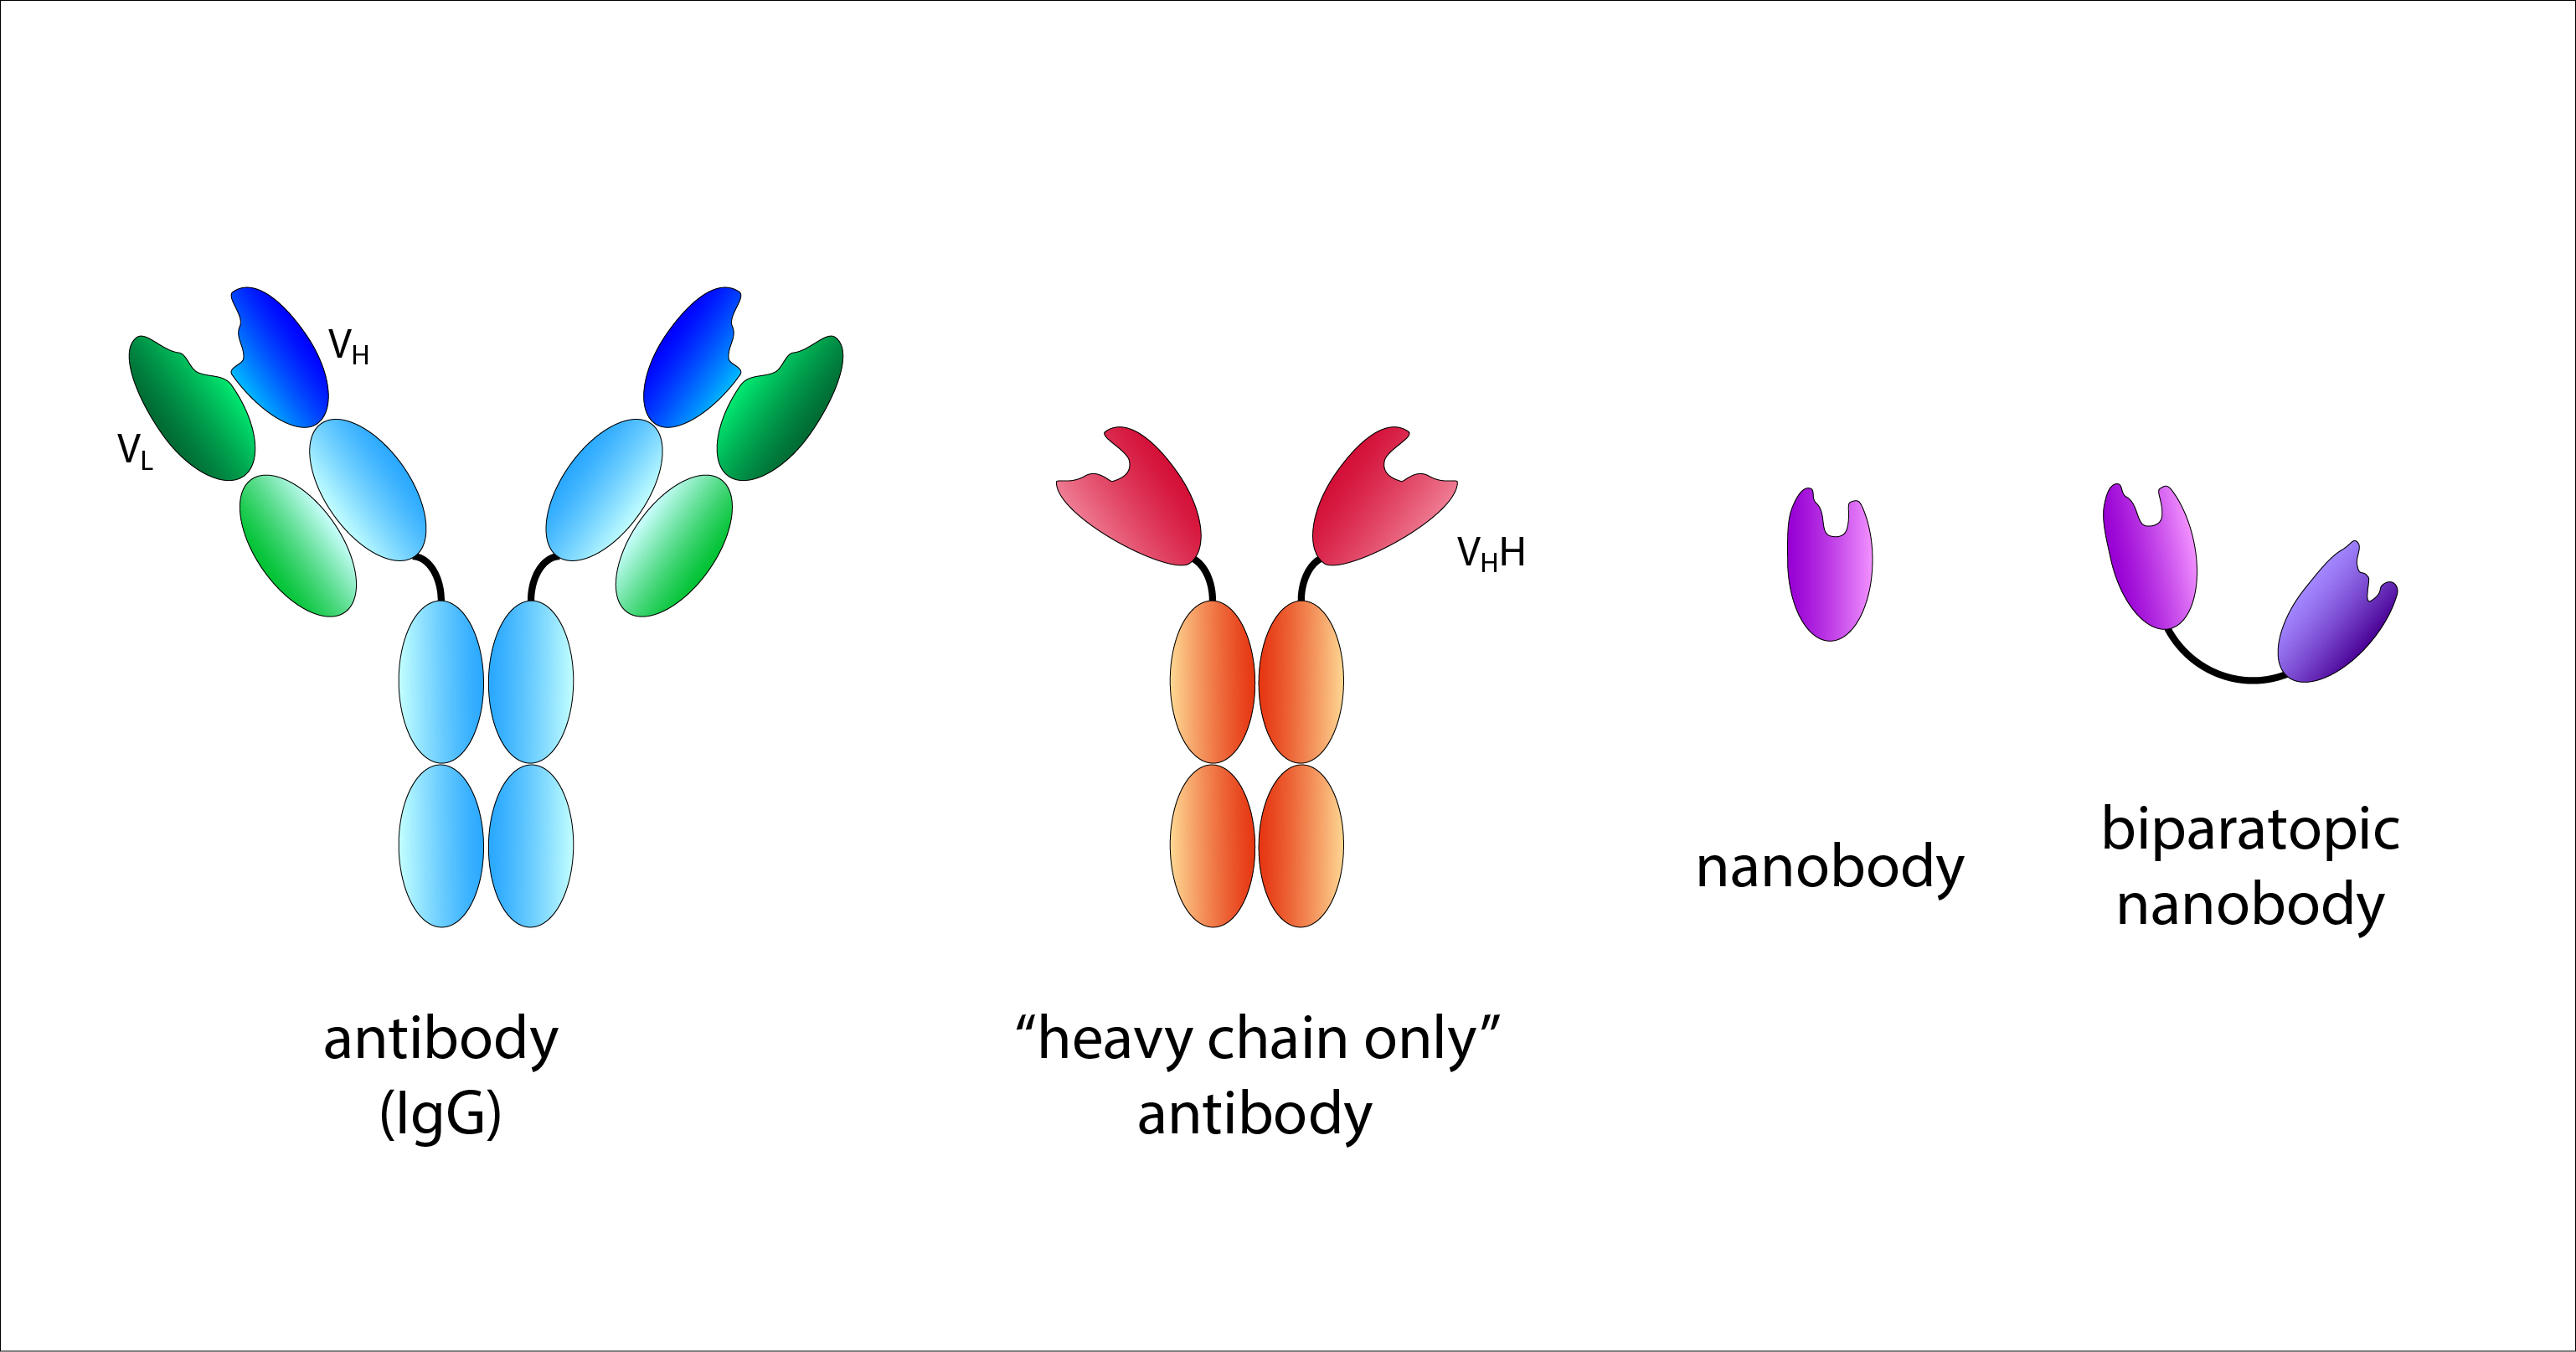 Schematic representation of the structure of conventional antibodies, 'heavy chain only' antibodies, nanobodies and biparatopic nanobodies in different colours.